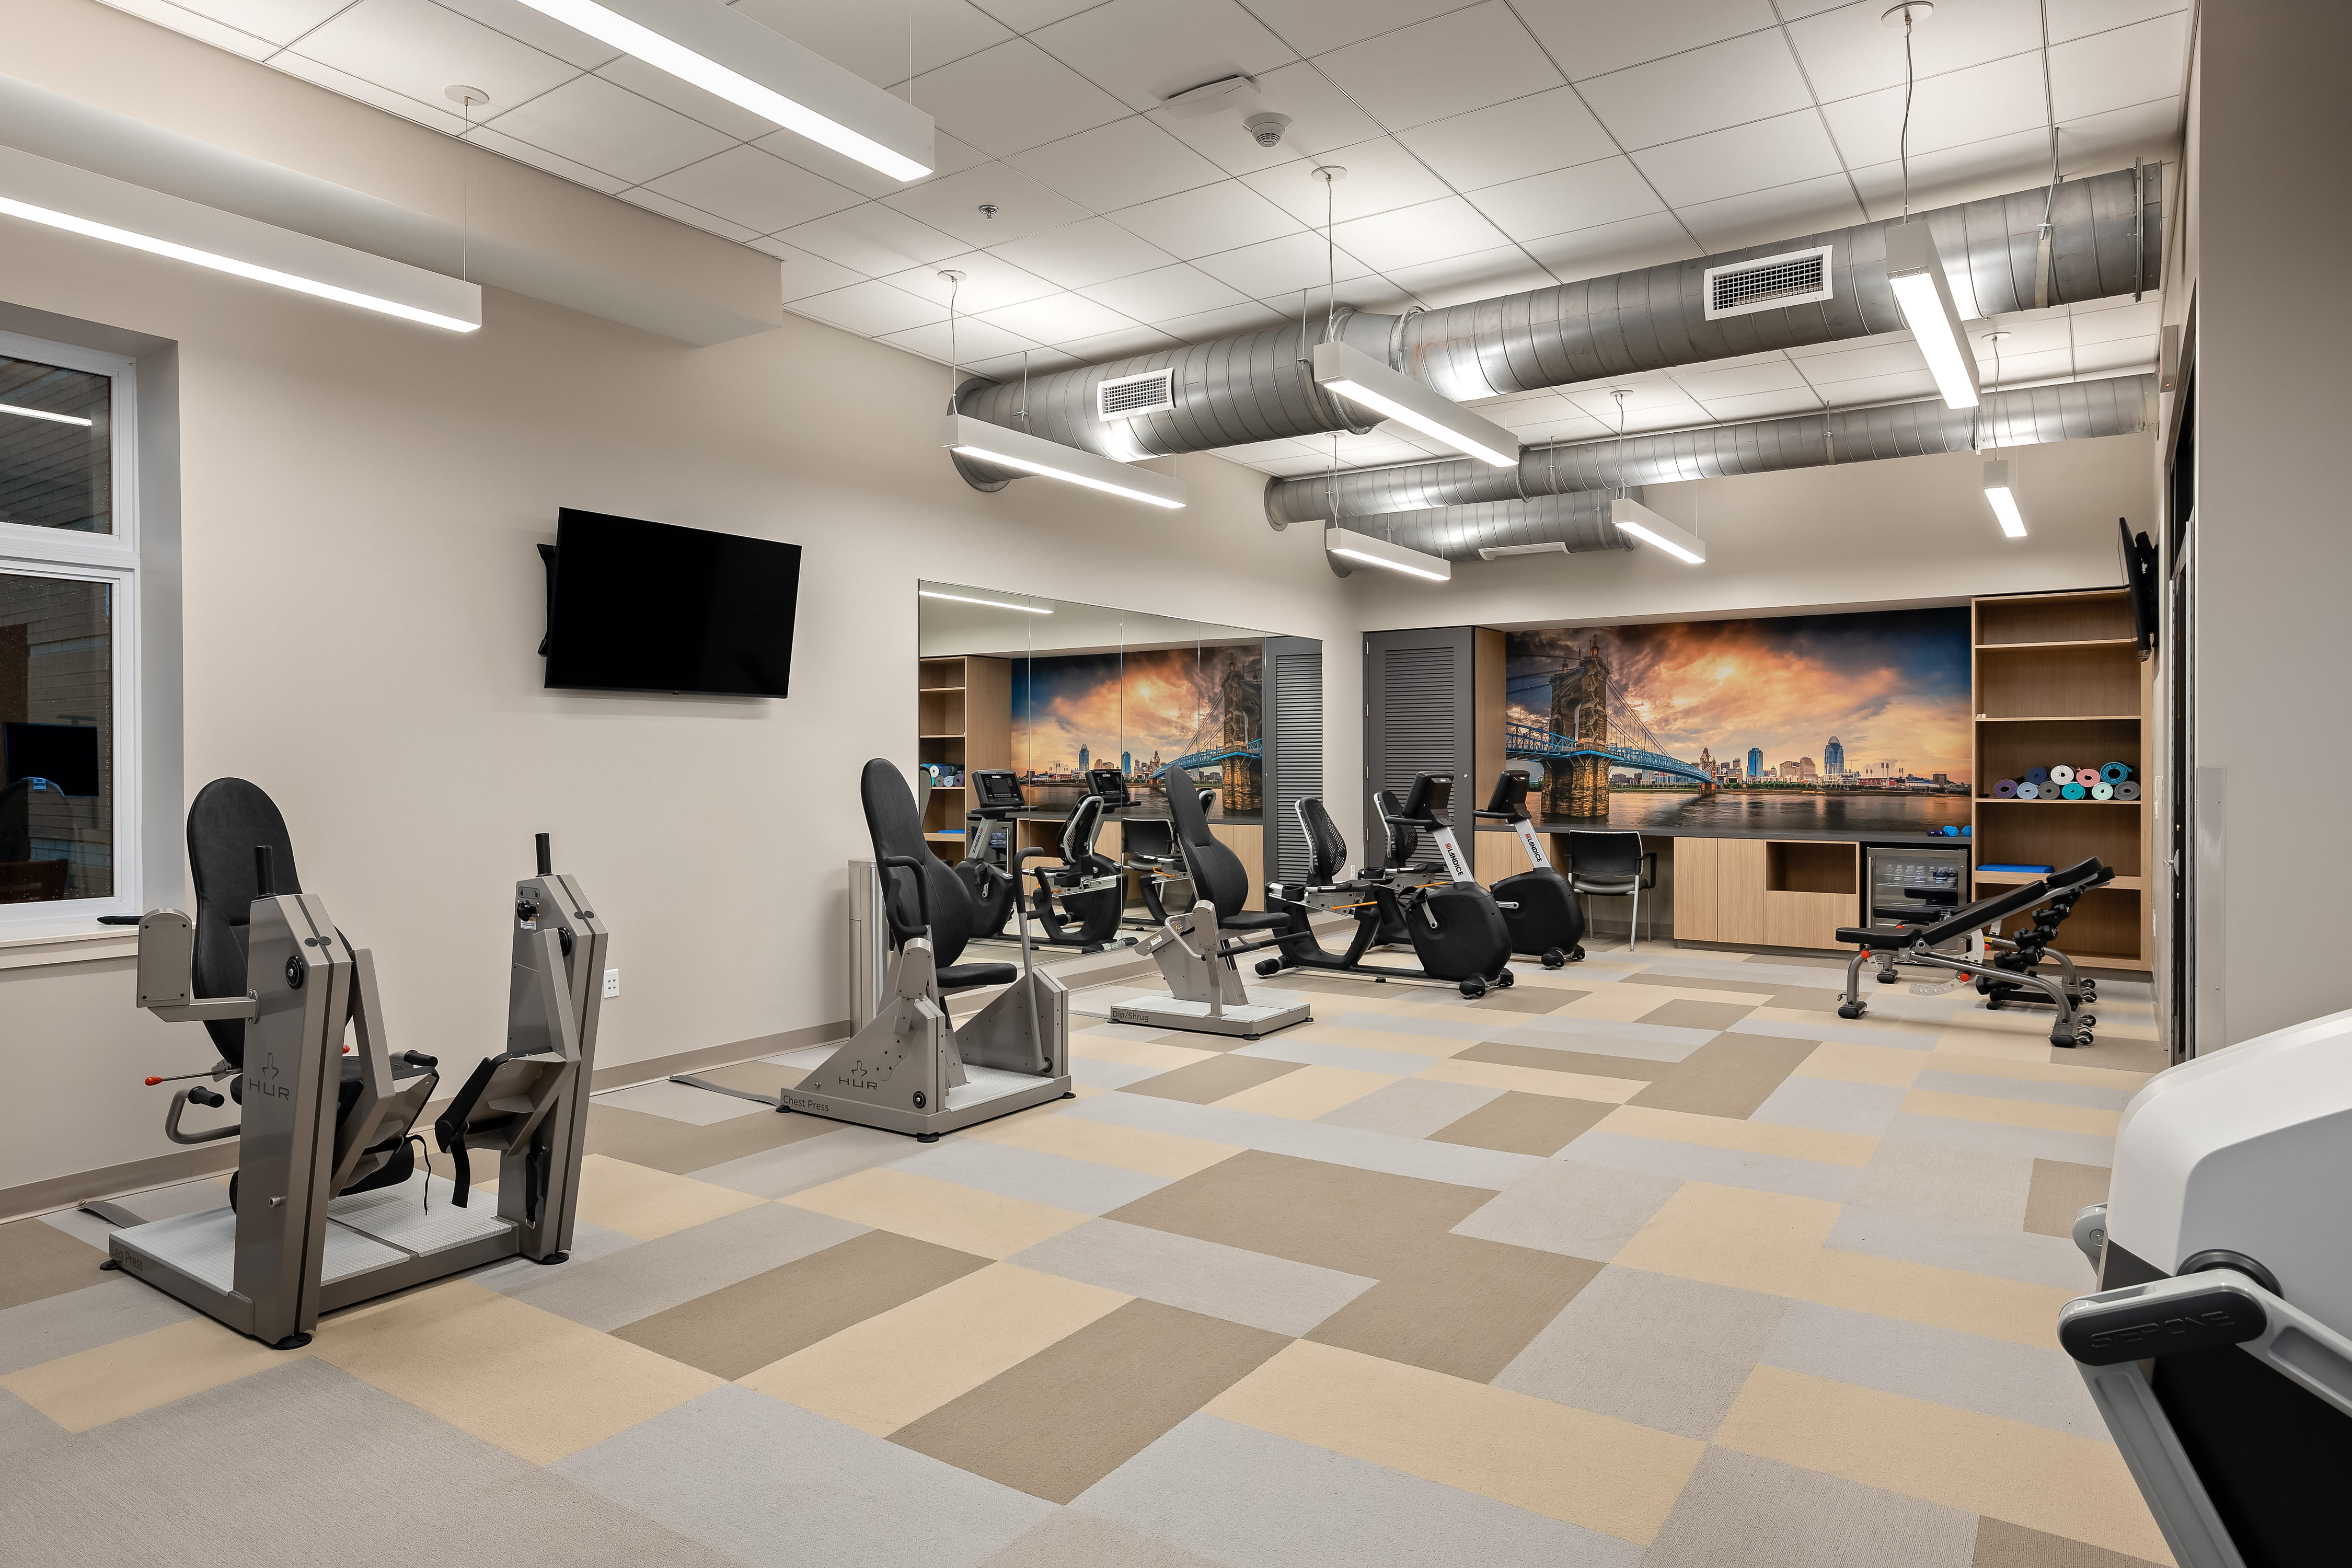 Fitness center at Anthology of Blue Ash in Blue Ash, Ohio